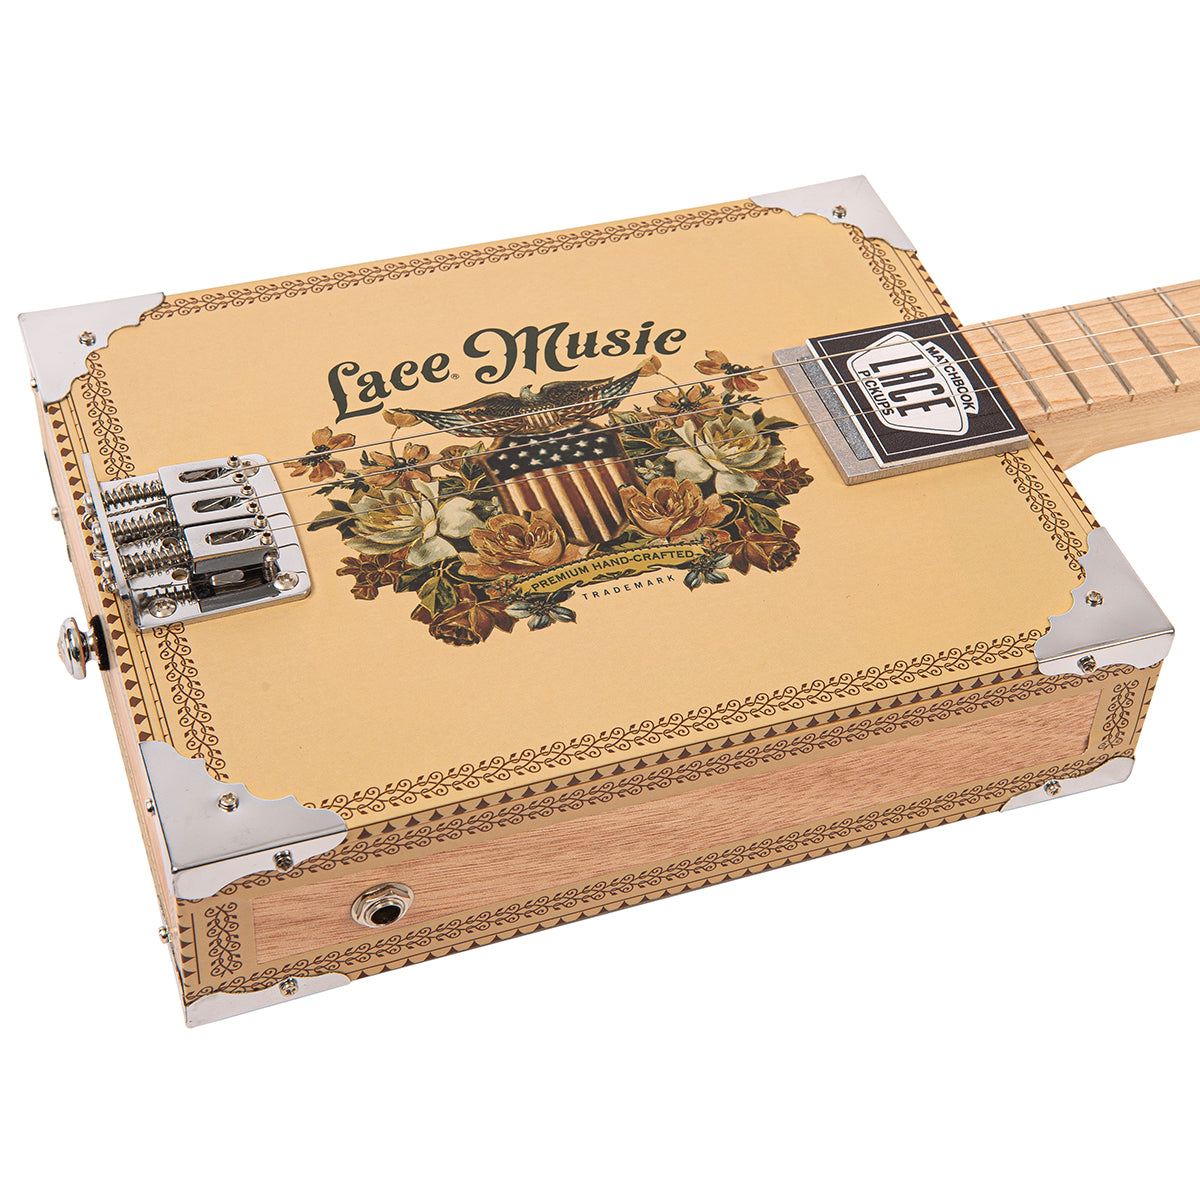 Lace Cigar Box Electric Guitar ~ 3 String ~ Americana, Electric Guitars for sale at Richards Guitars.